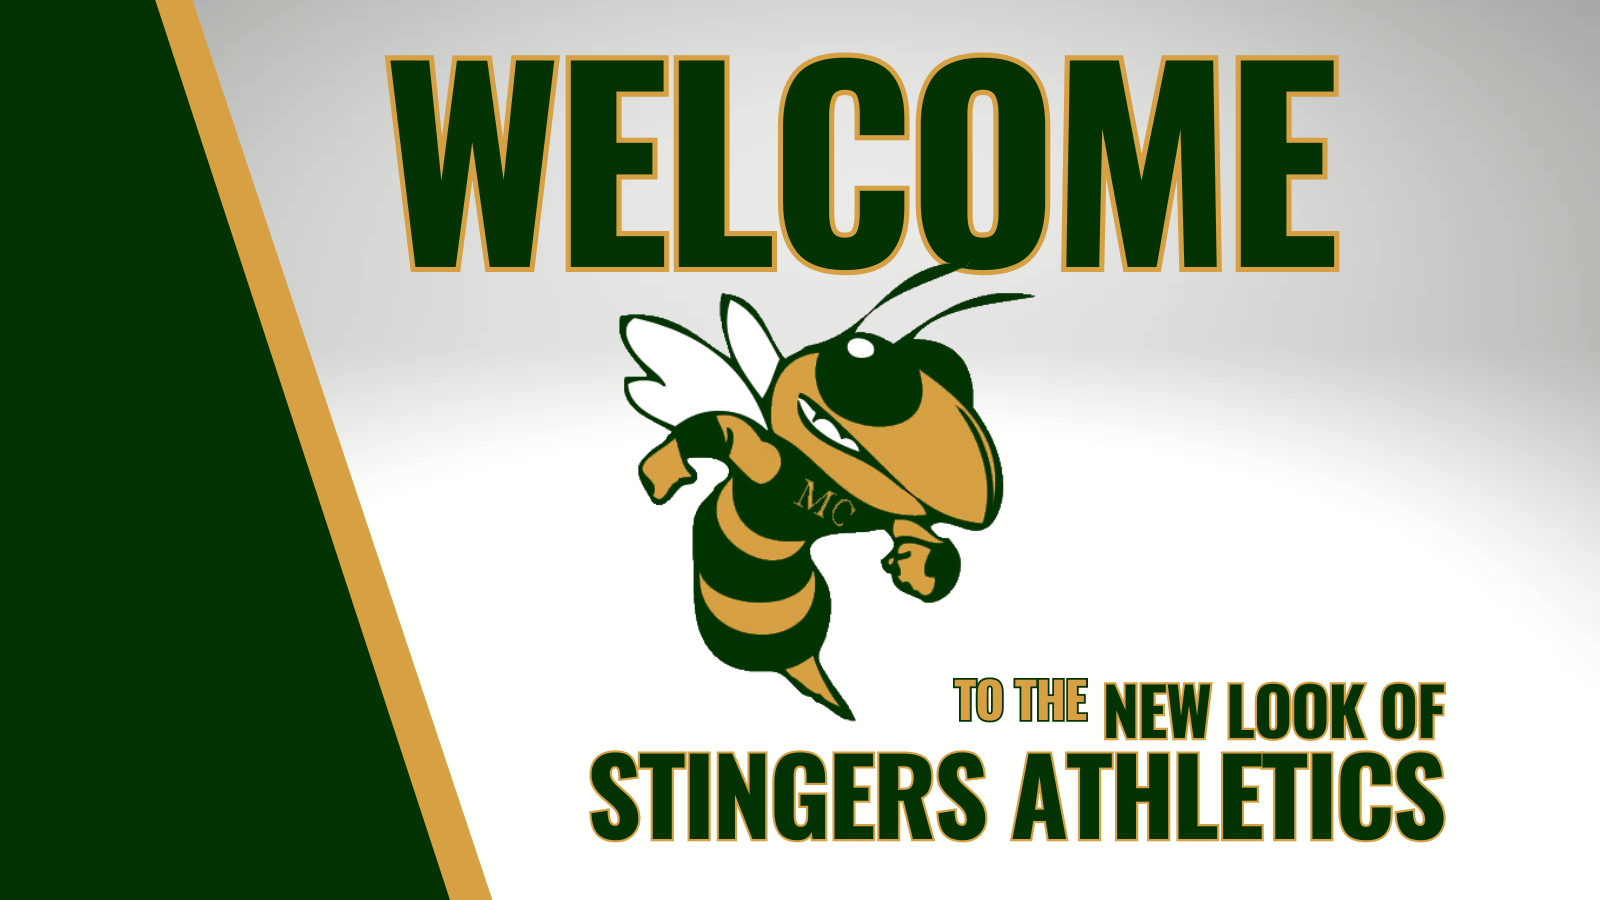 1718746122_Announcement.png - Image for 🎉 Exciting News for Stingers Athletics Fans! 🎉